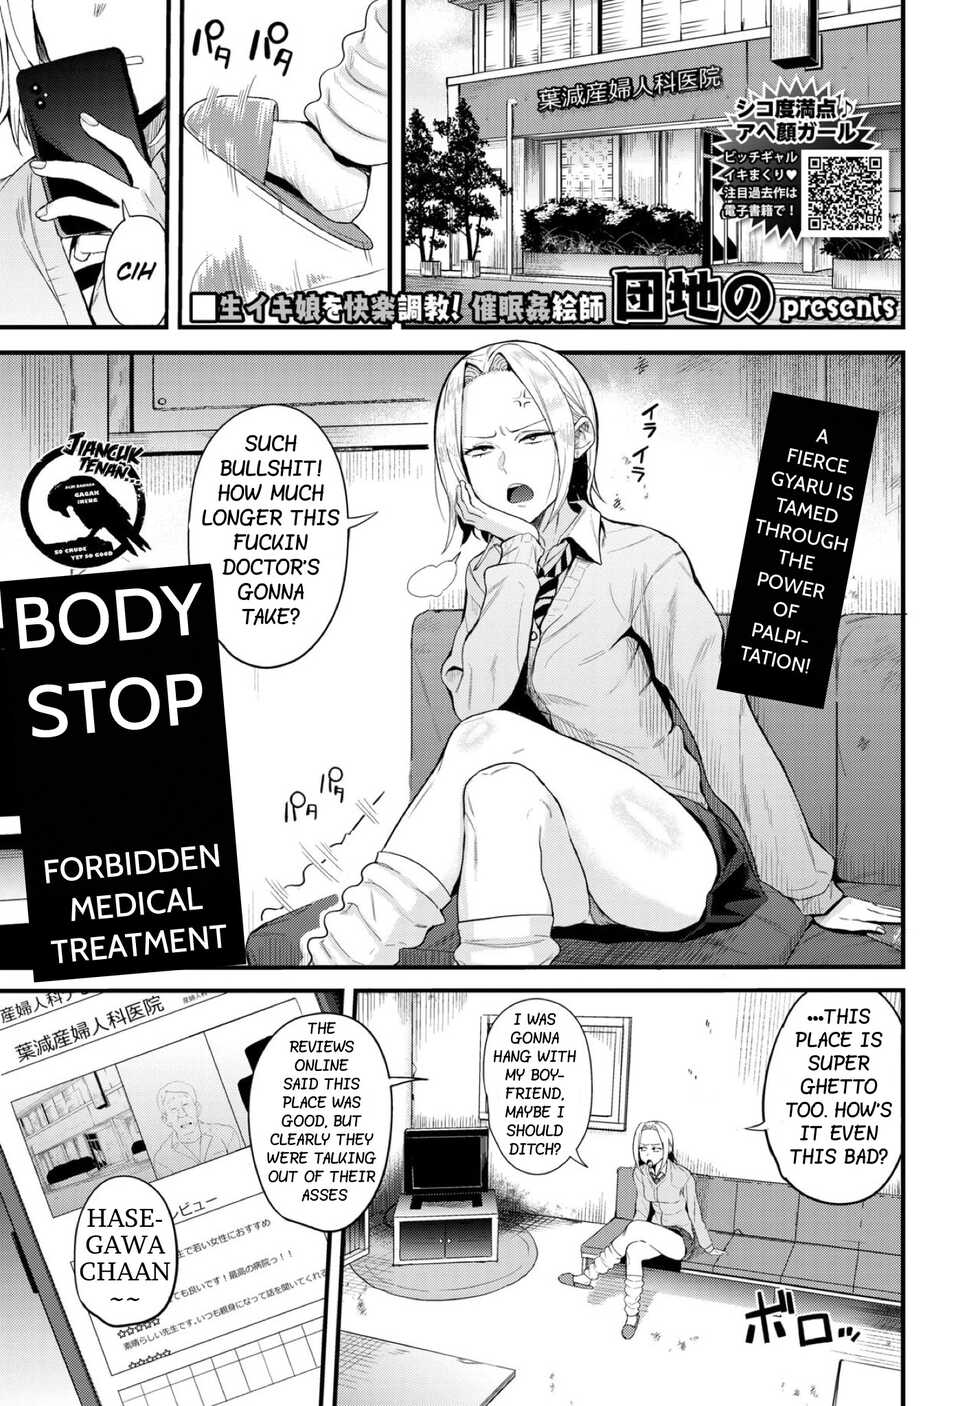 [Danchino] Body Stop ~ Forbidden Medical Treatment ~ (Revenge Hypnosis) [English] - Page 1